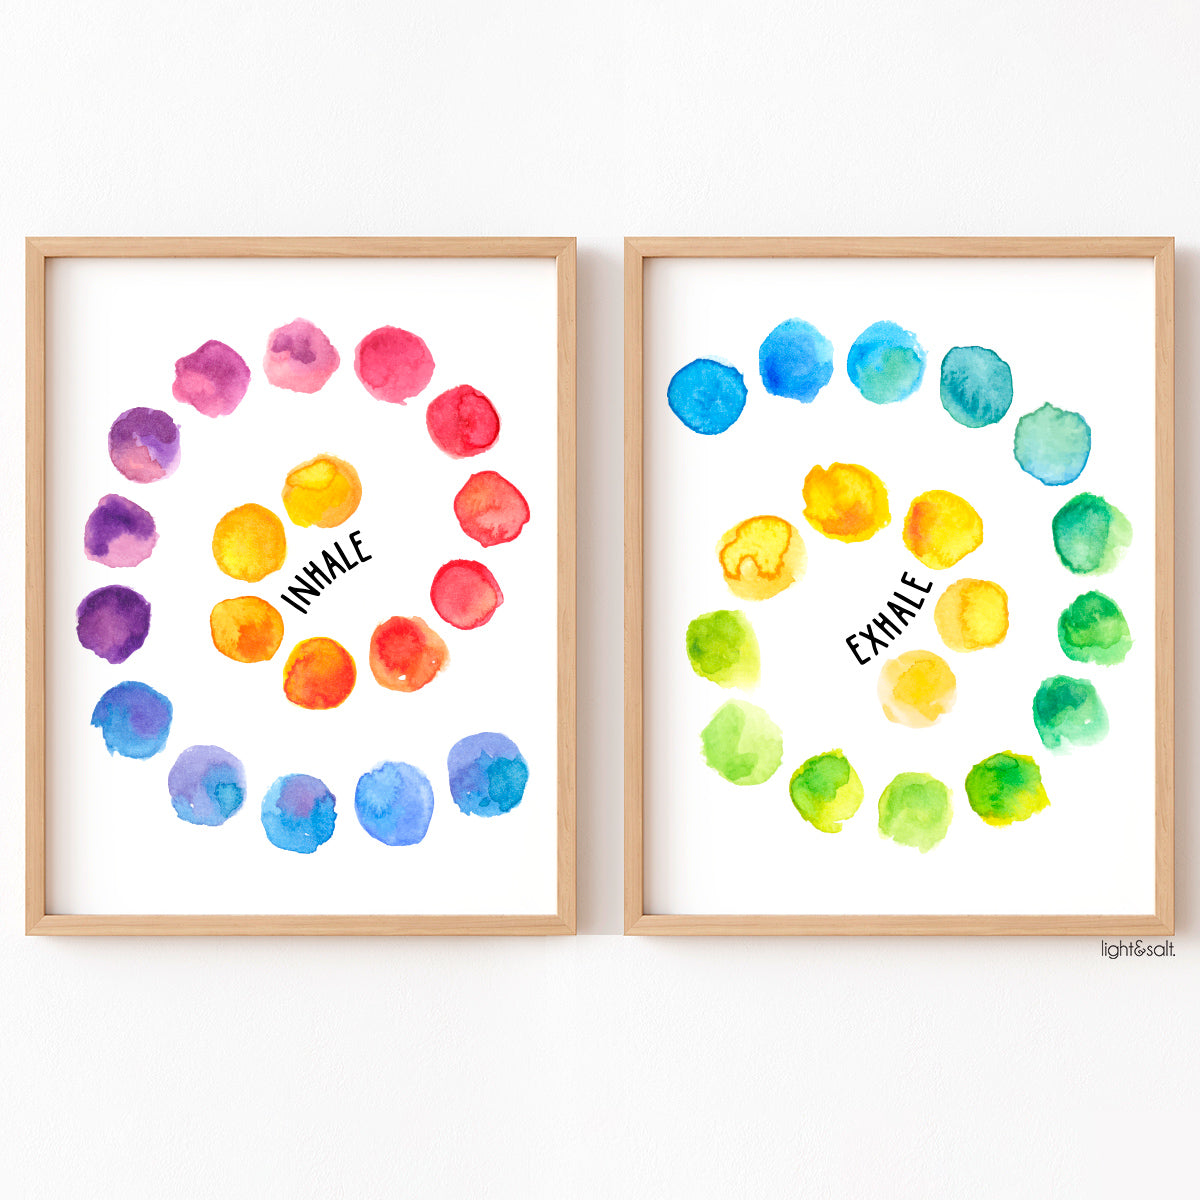 Watercolor Inhale, exhale poster set of 2, mindful breathing